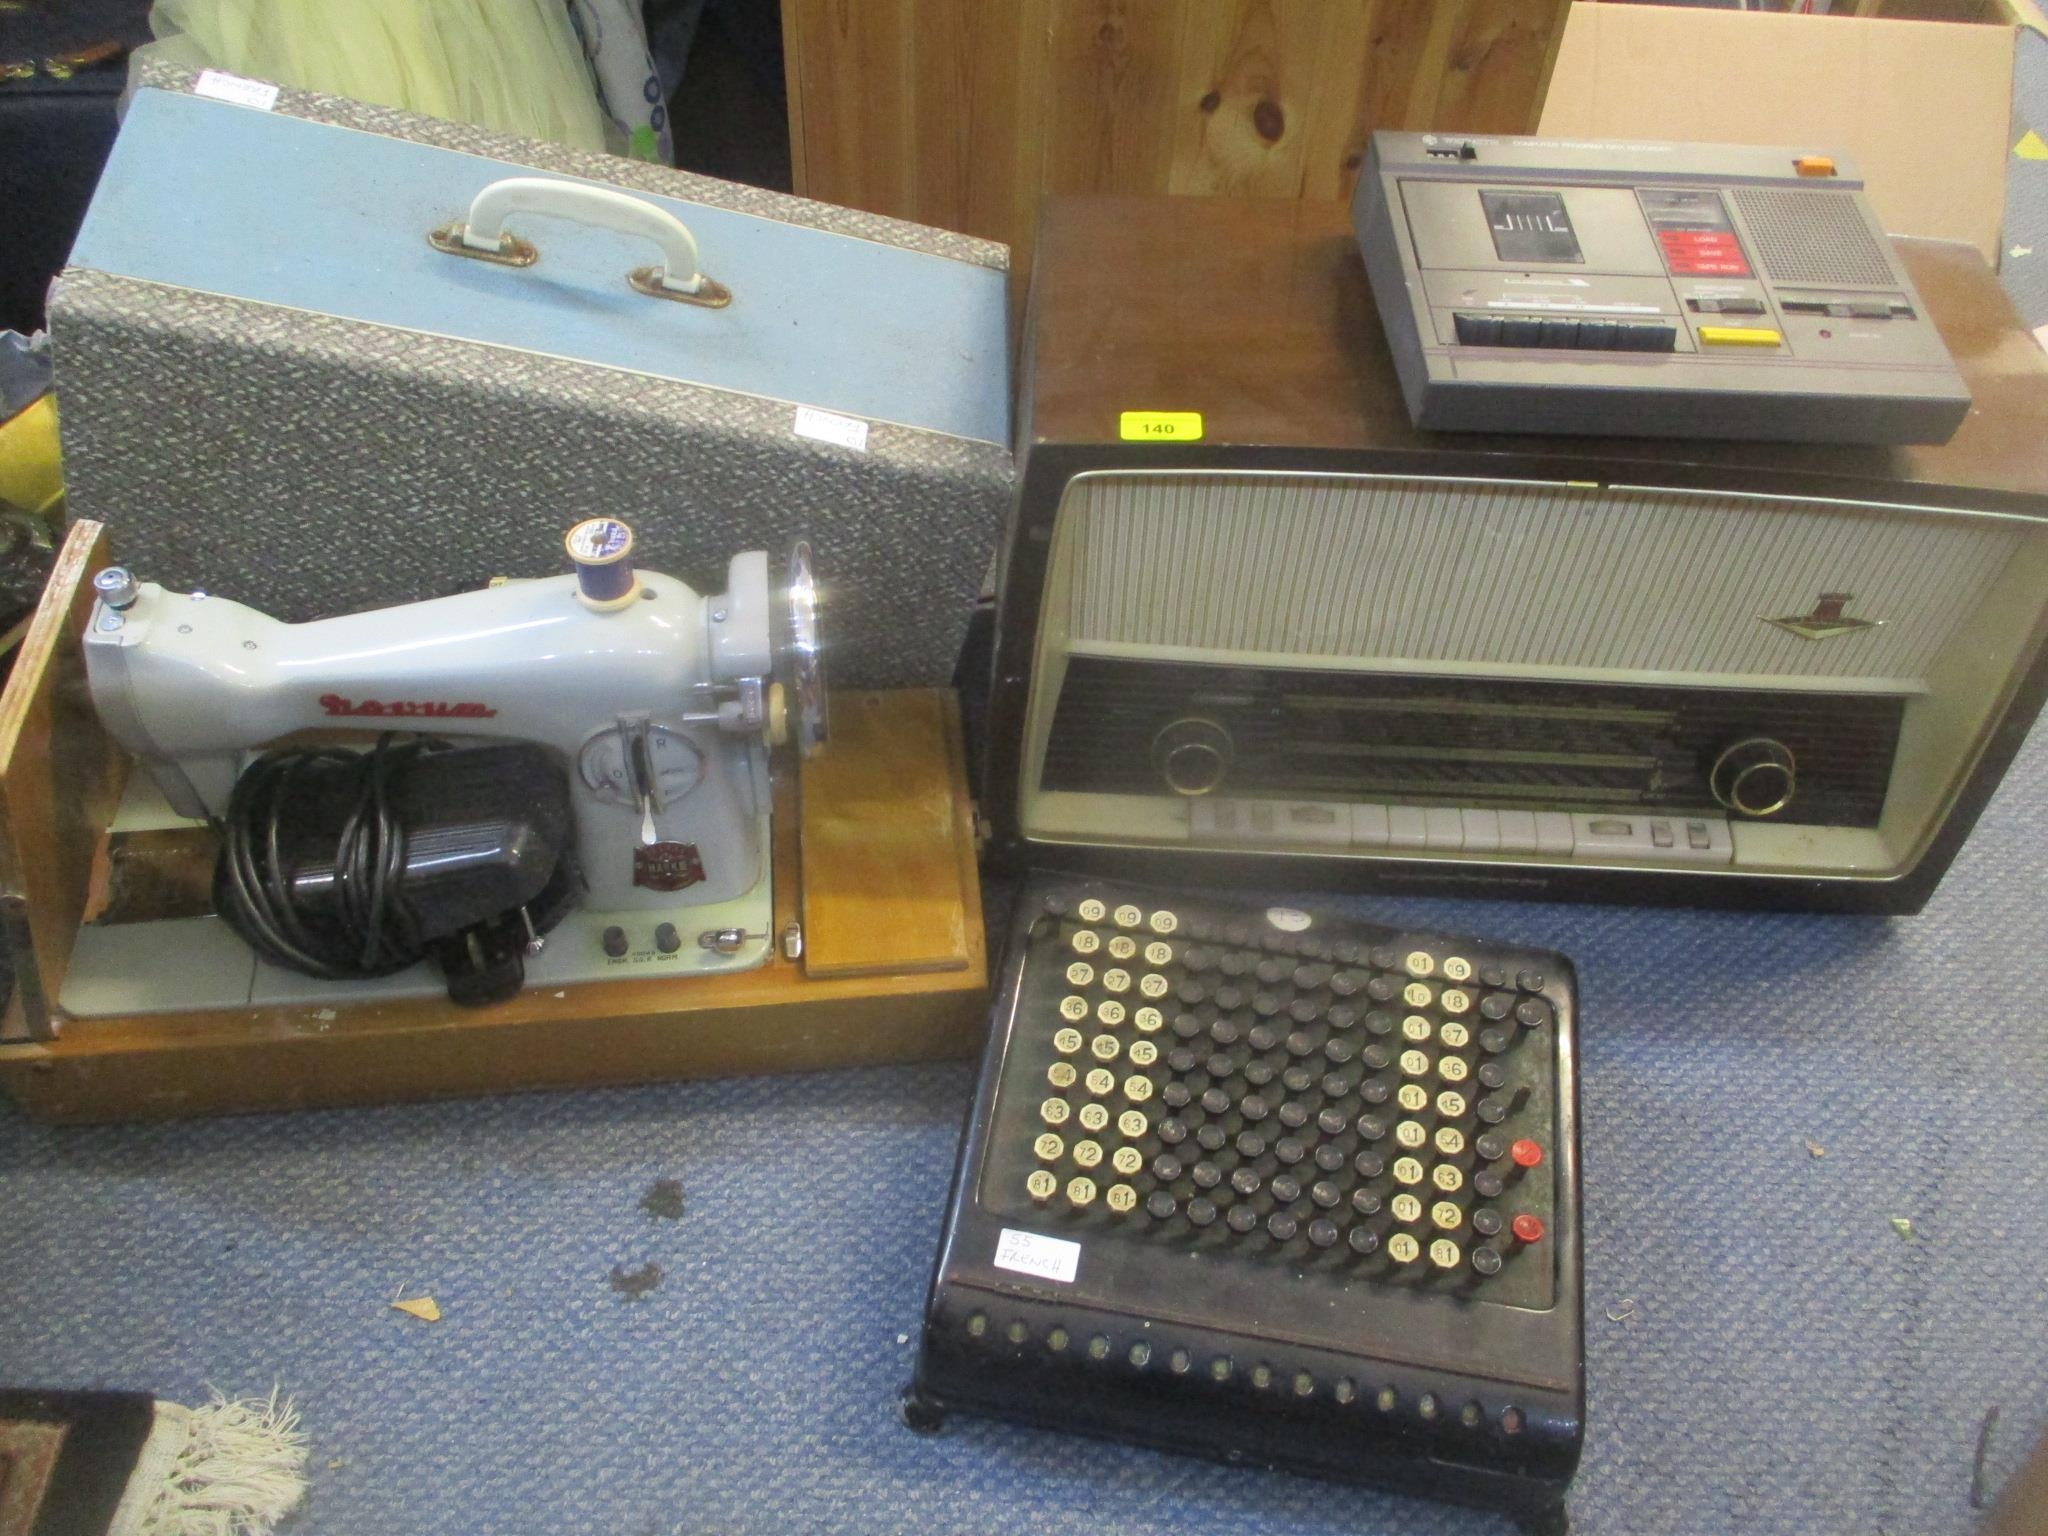 A Burroughs adding machine together with a Nord Mede radio, a Novum sewing machine and a WH Smith